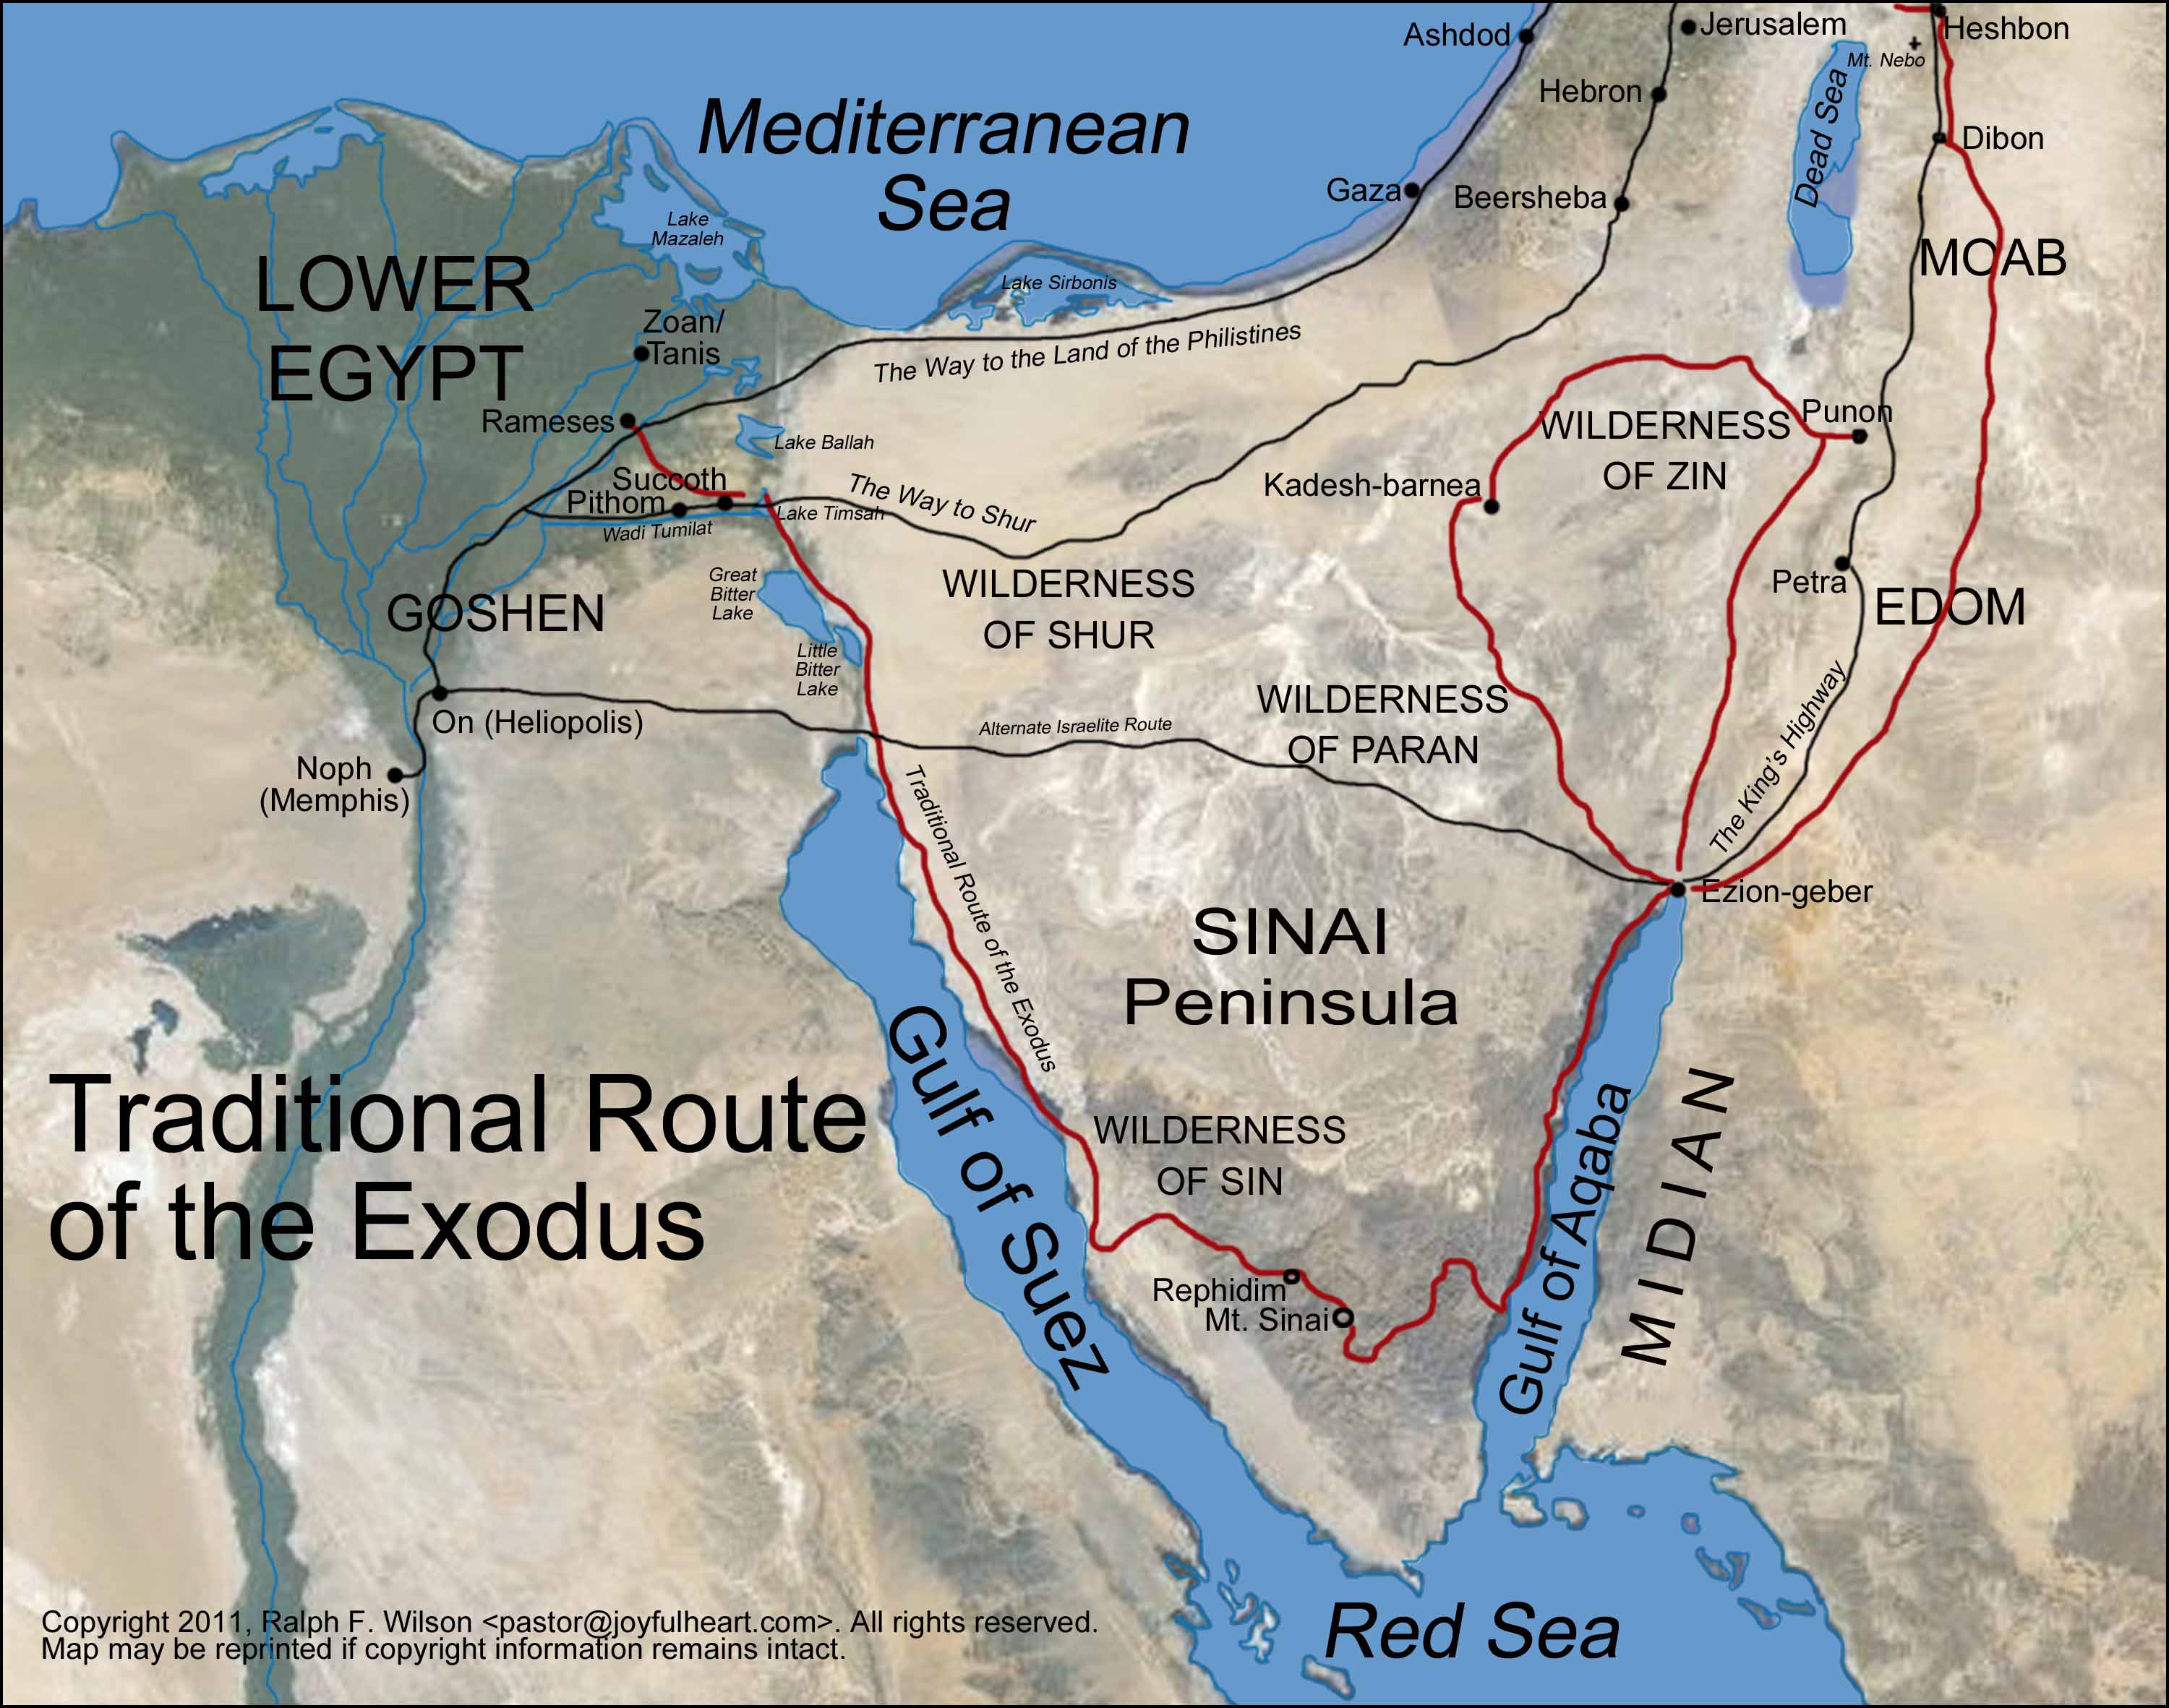 appendix-2-the-route-of-the-exodus-moses-bible-study